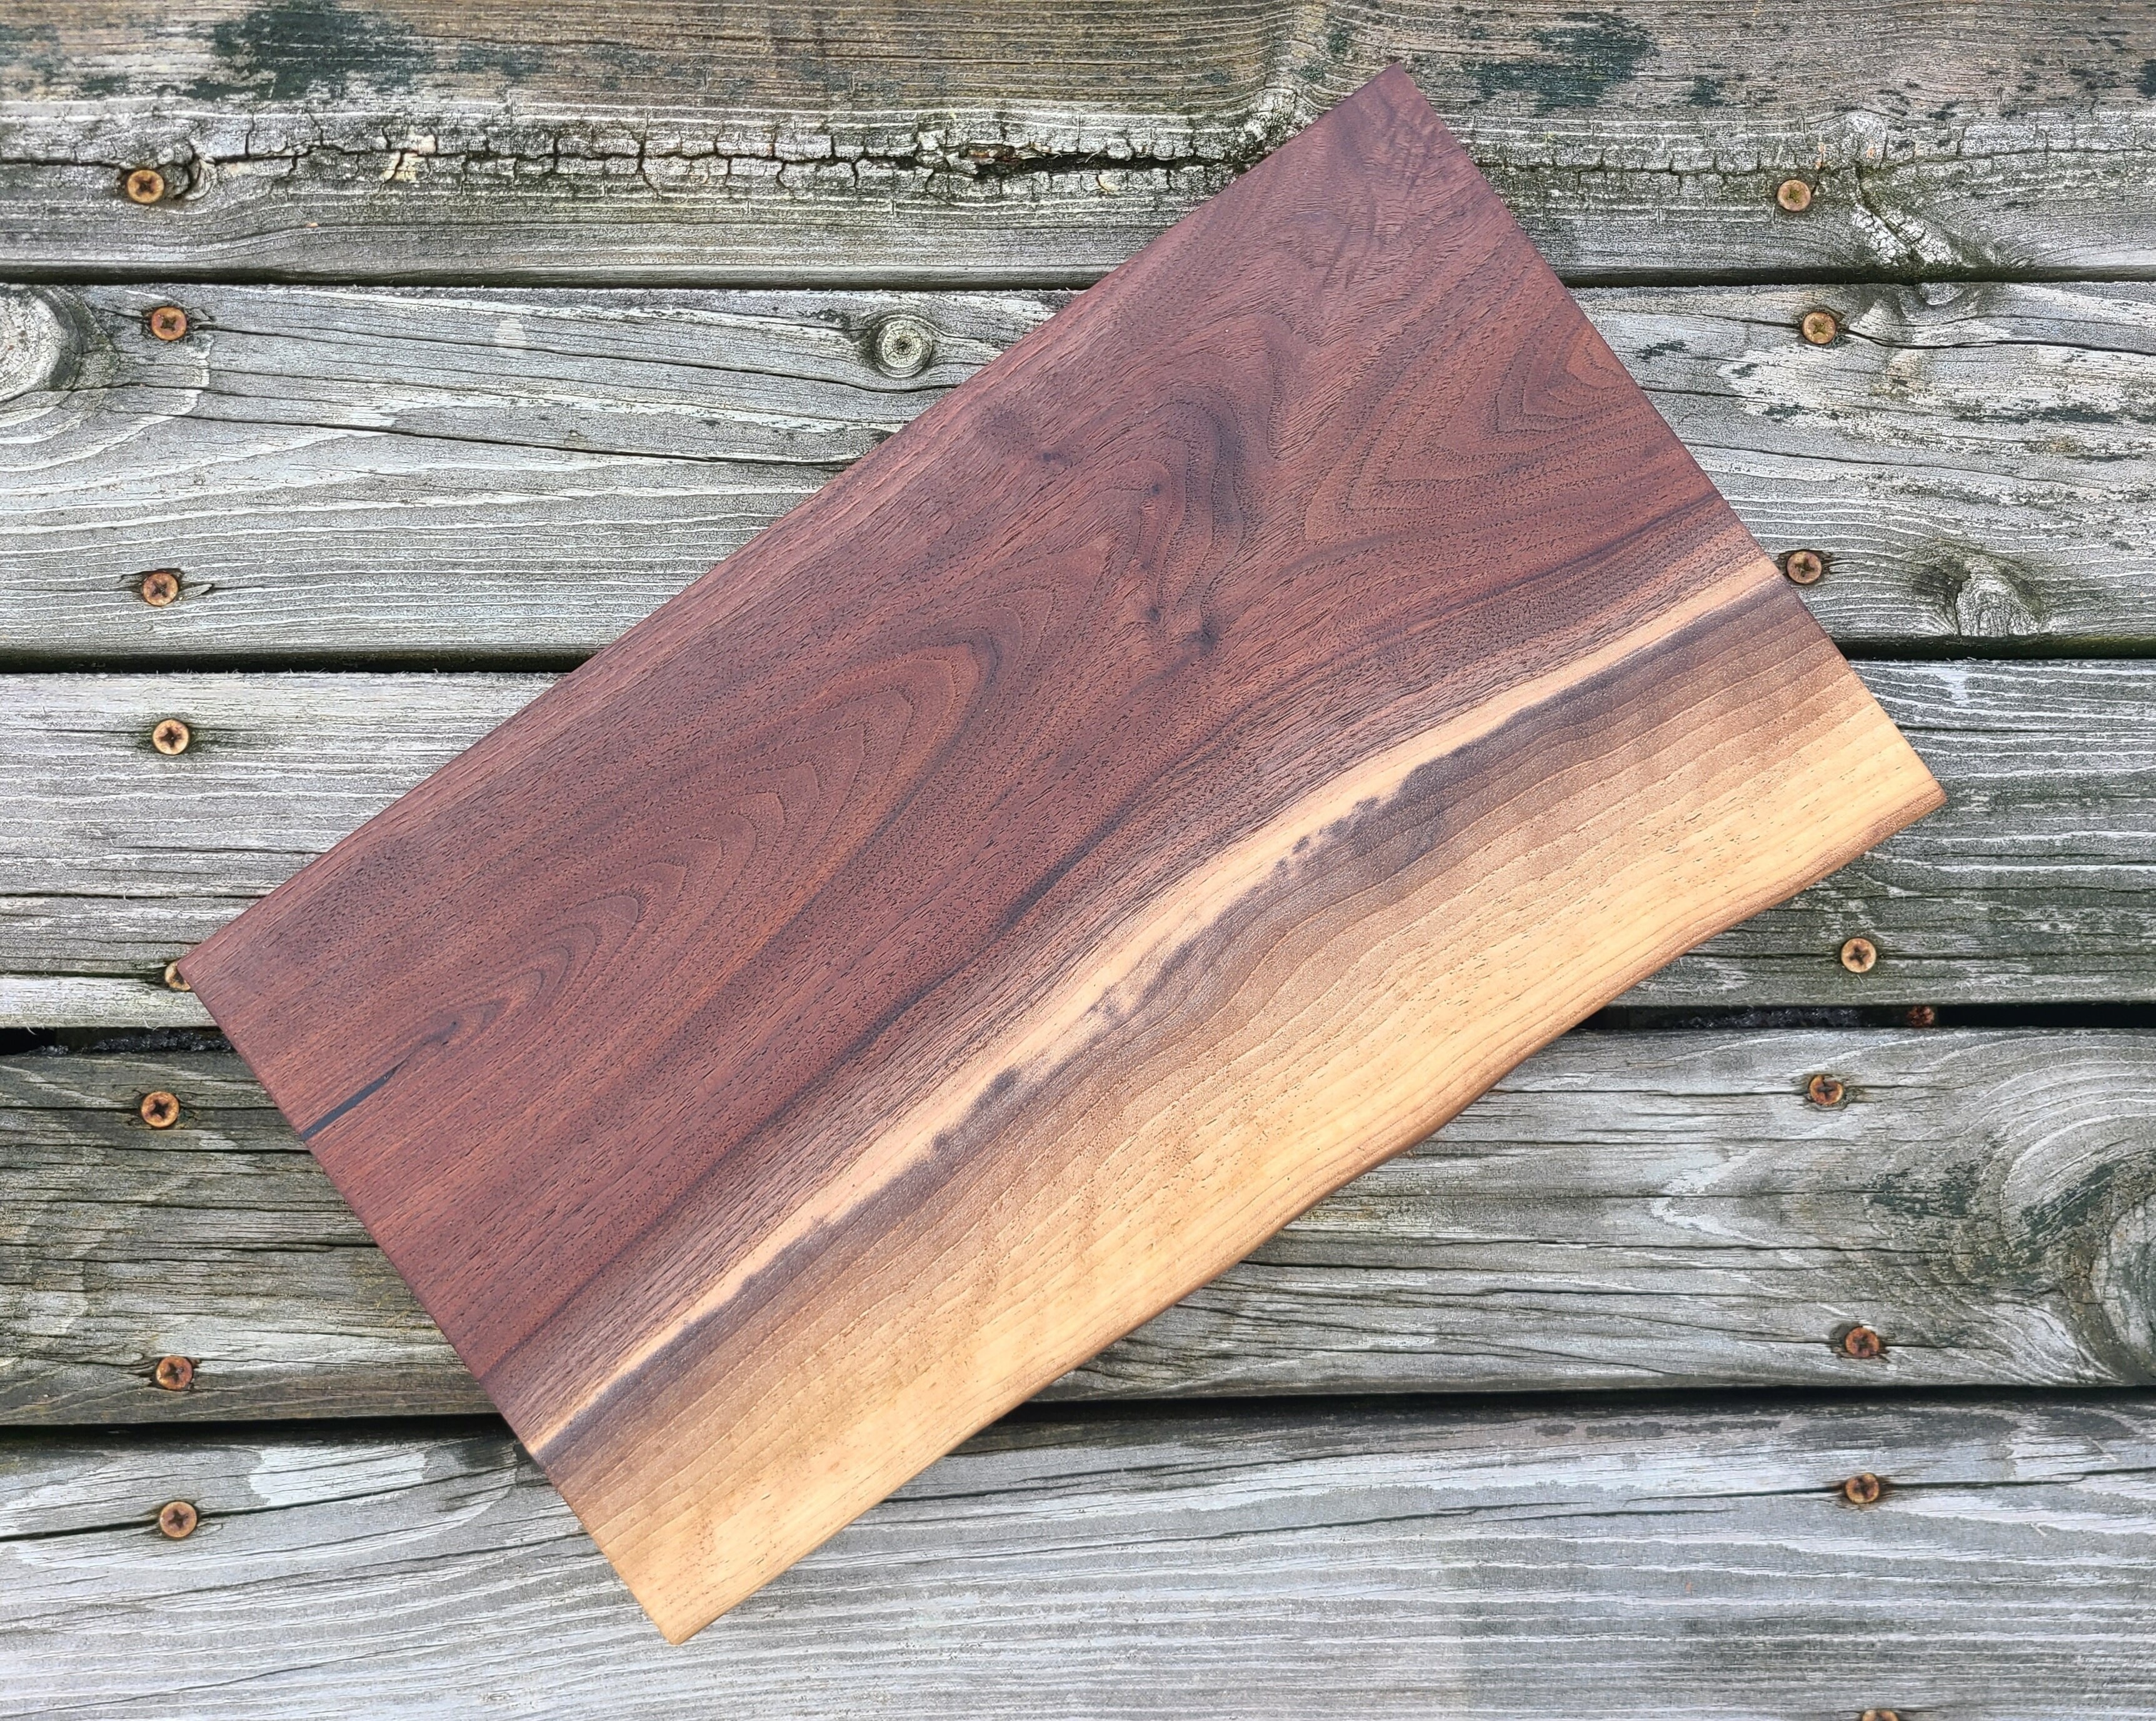 Free Patterns: Bread Boards and Cutting Boards - FineWoodworking